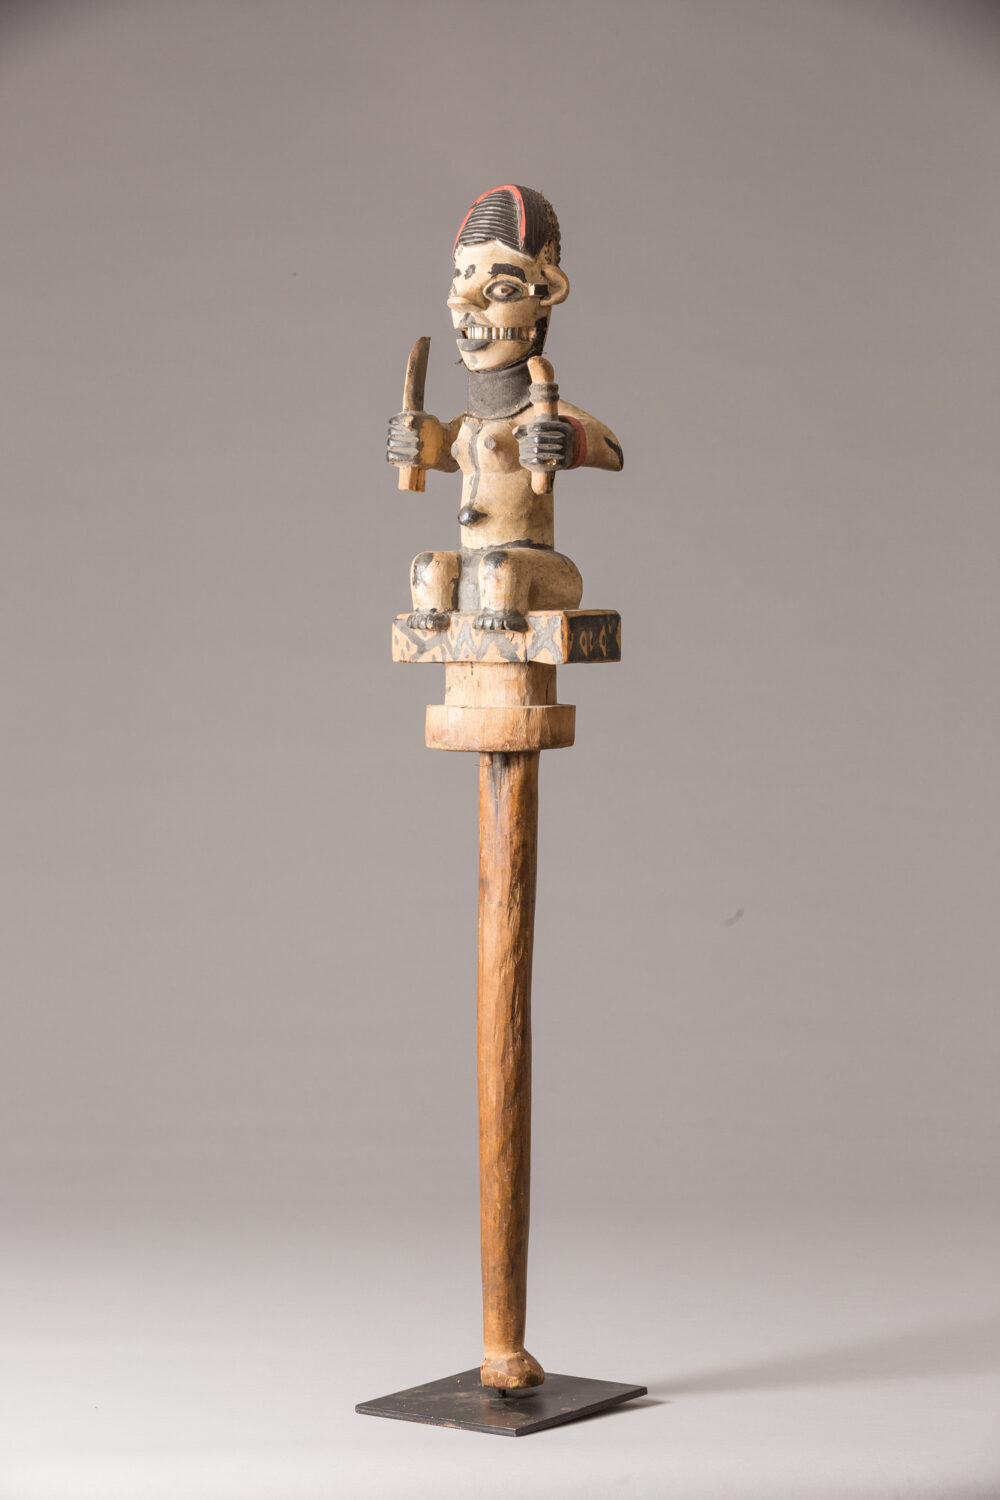 thumbnail of Sculpture of a figure made out of wood